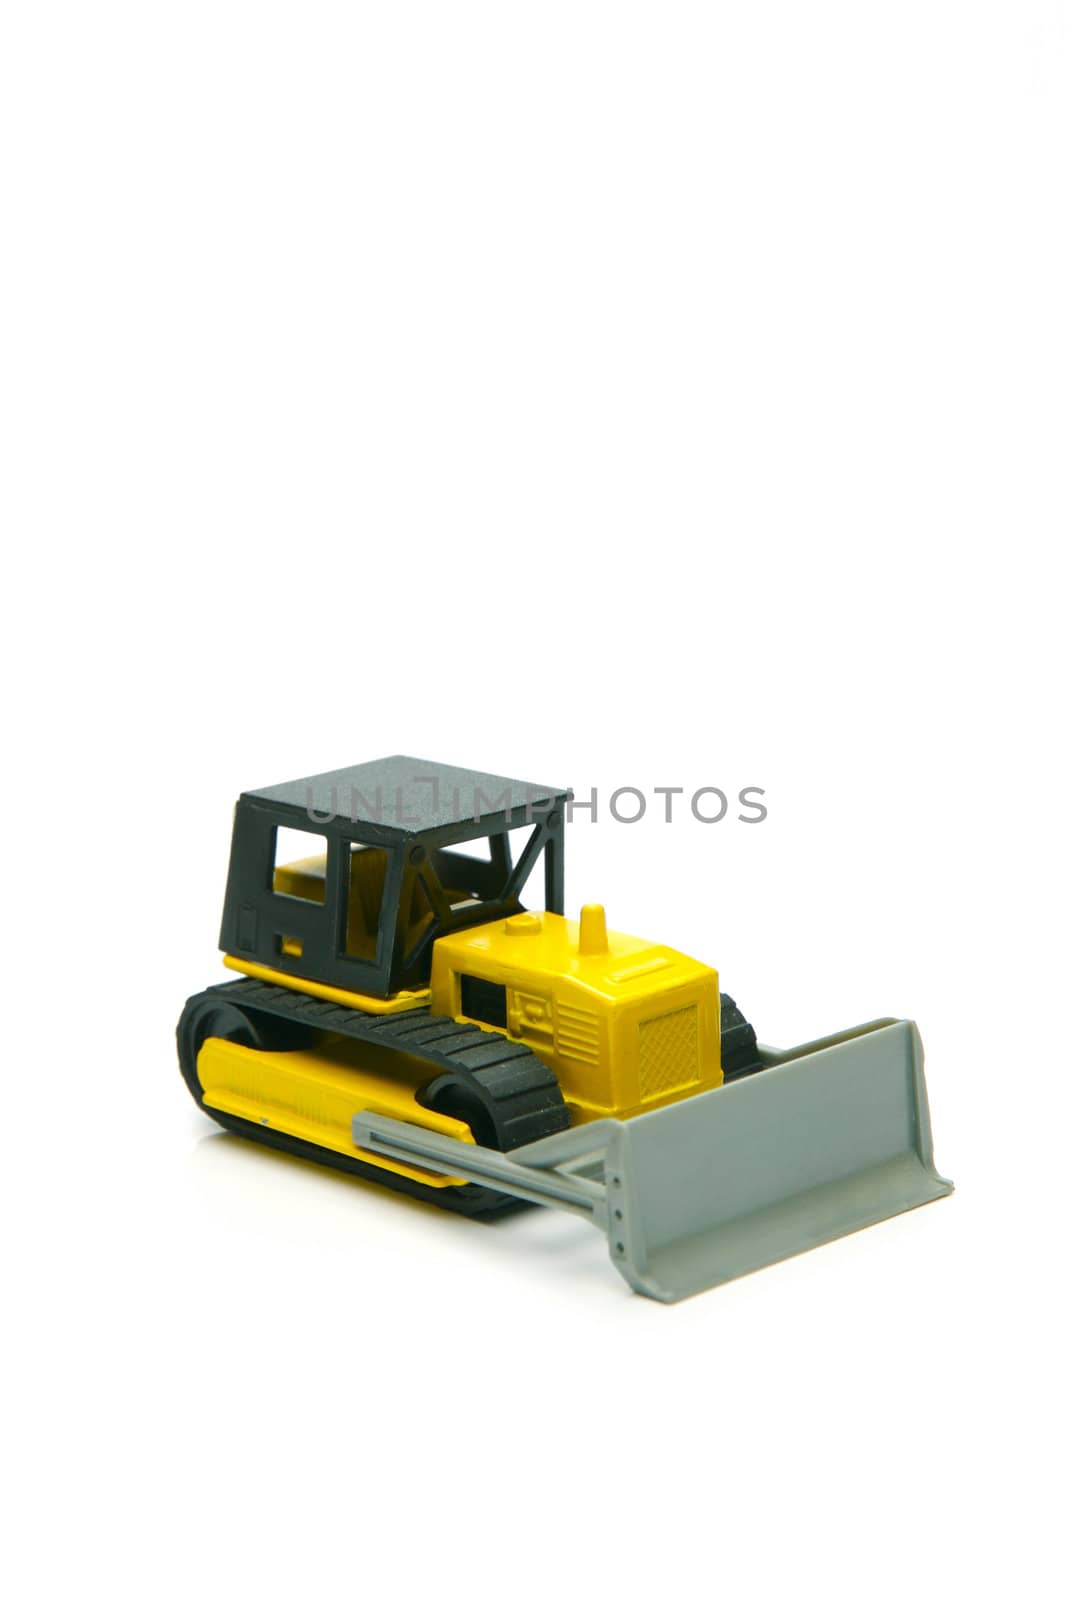 Miniature model earth moving equipment isolated against a white background